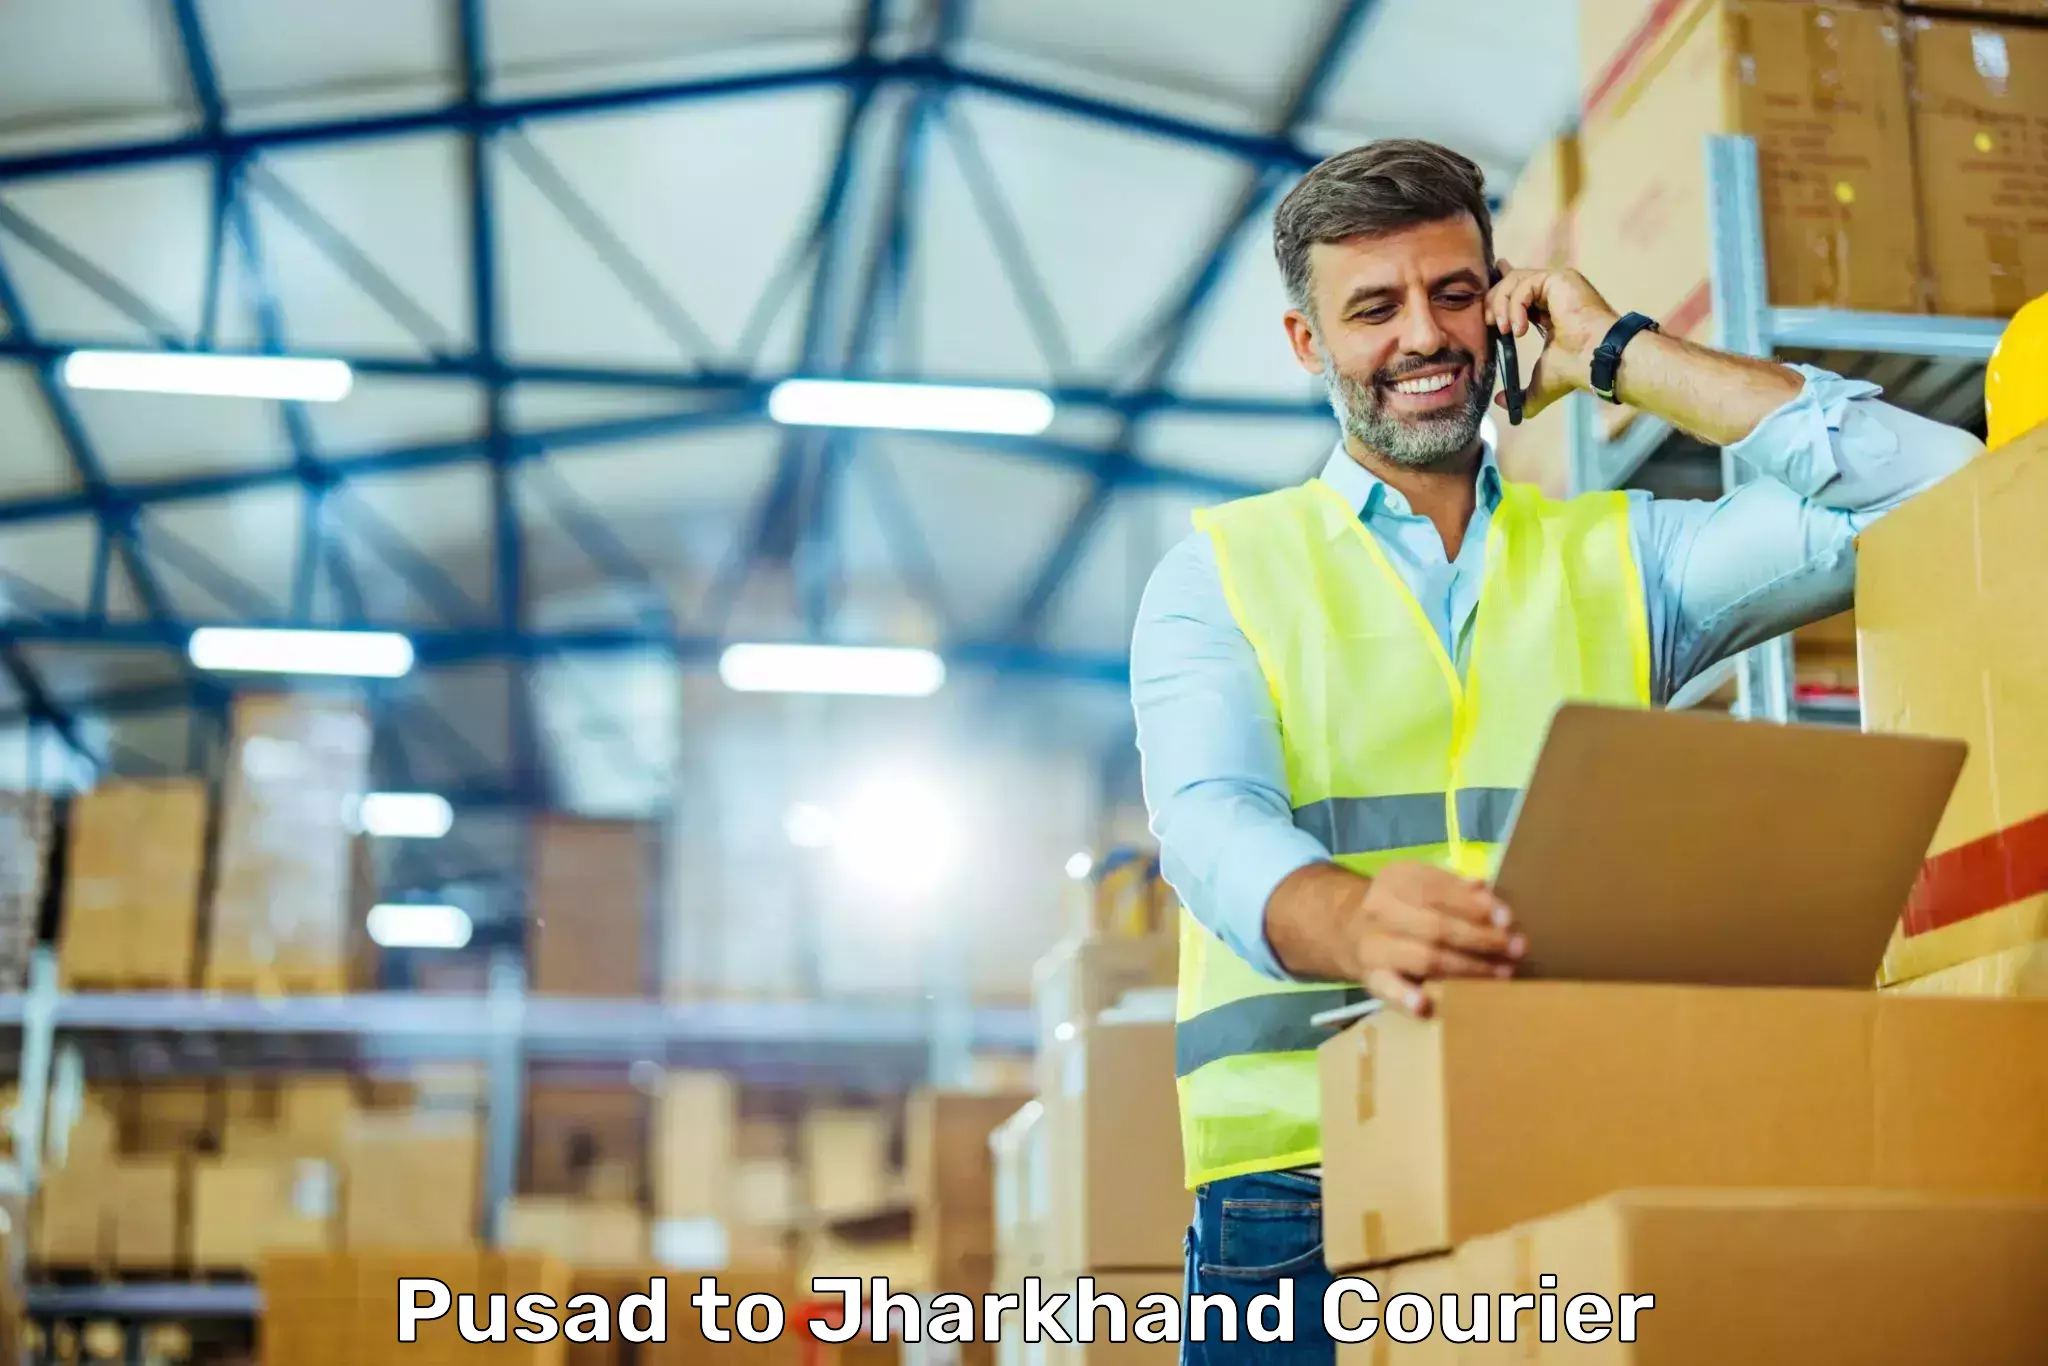 24/7 shipping services in Pusad to Jharkhand